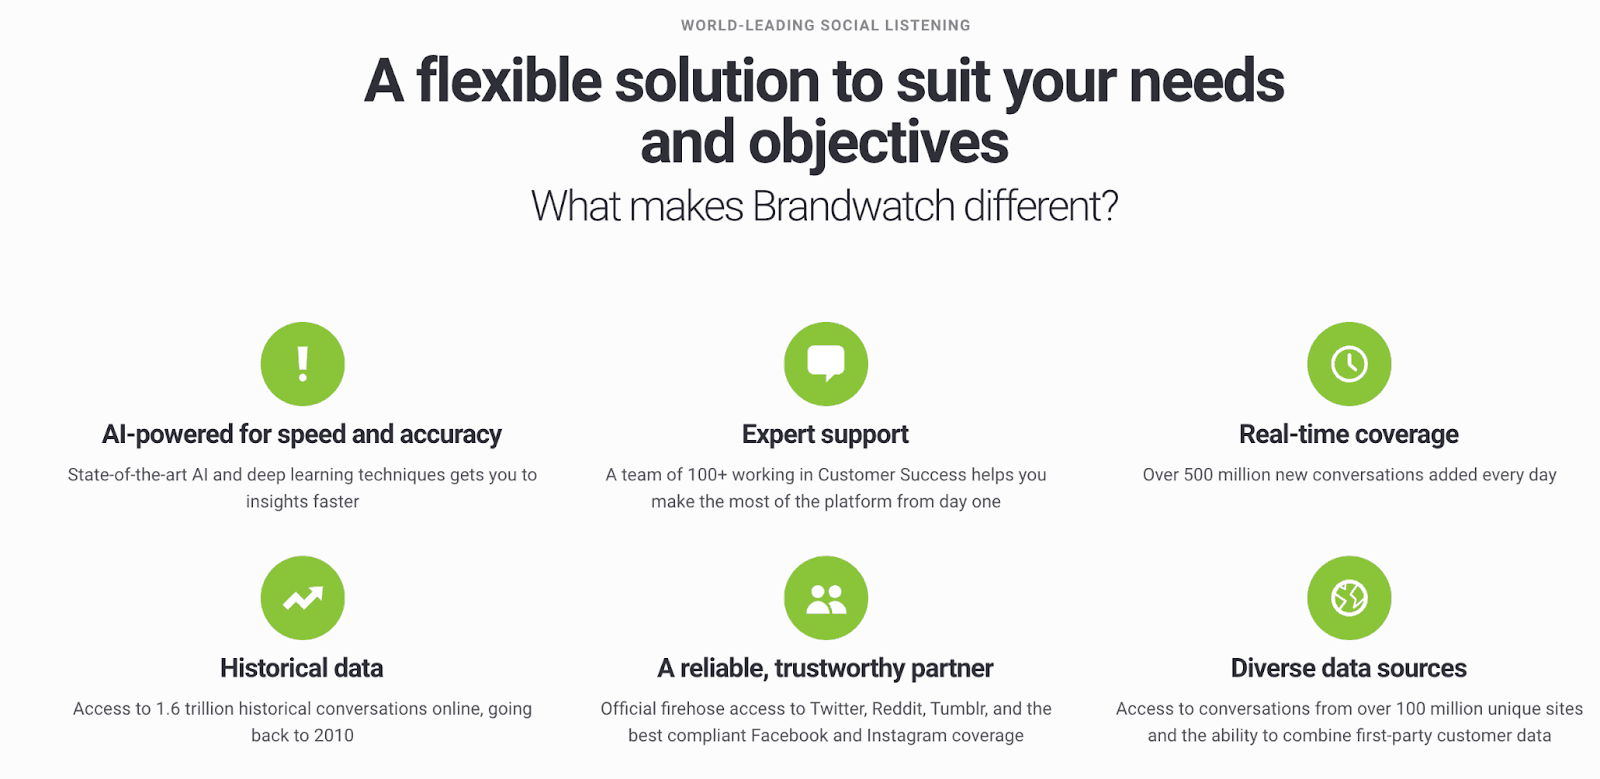 Brandwatch's website - A flexible solution to suit your needs and objectives